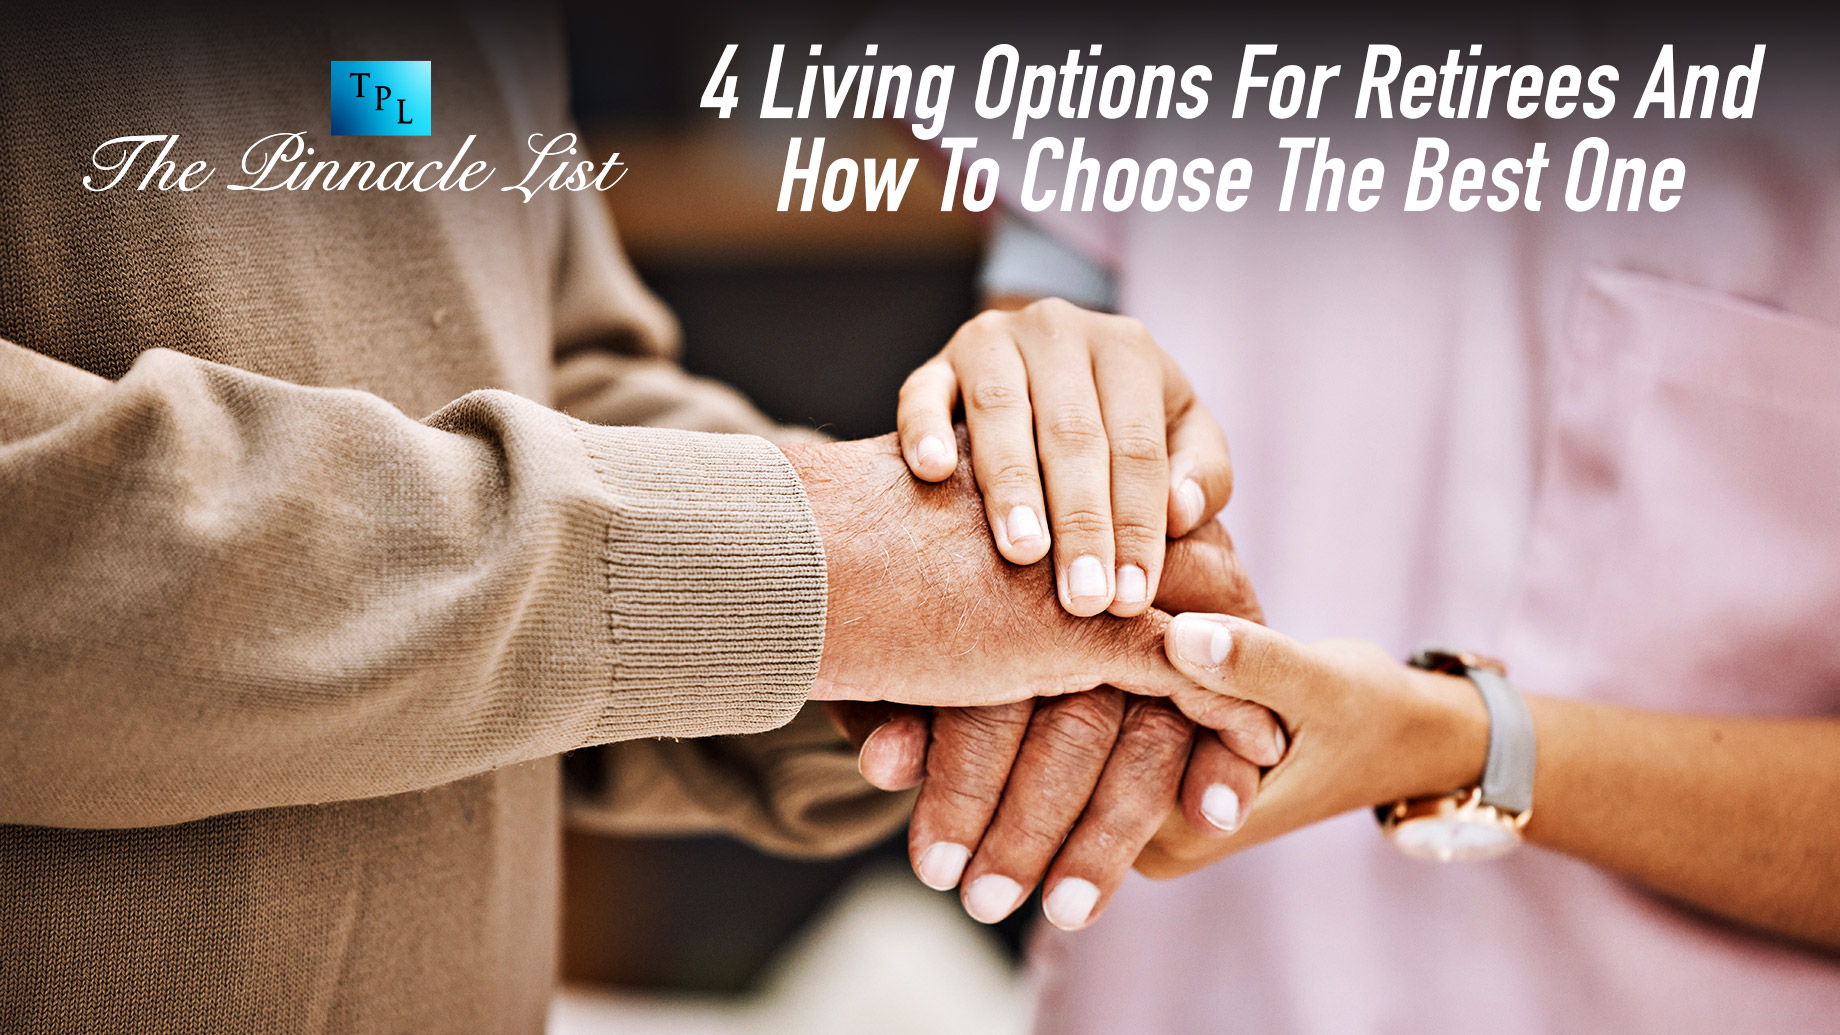 4 Living Options For Retirees And How To Choose The Best One